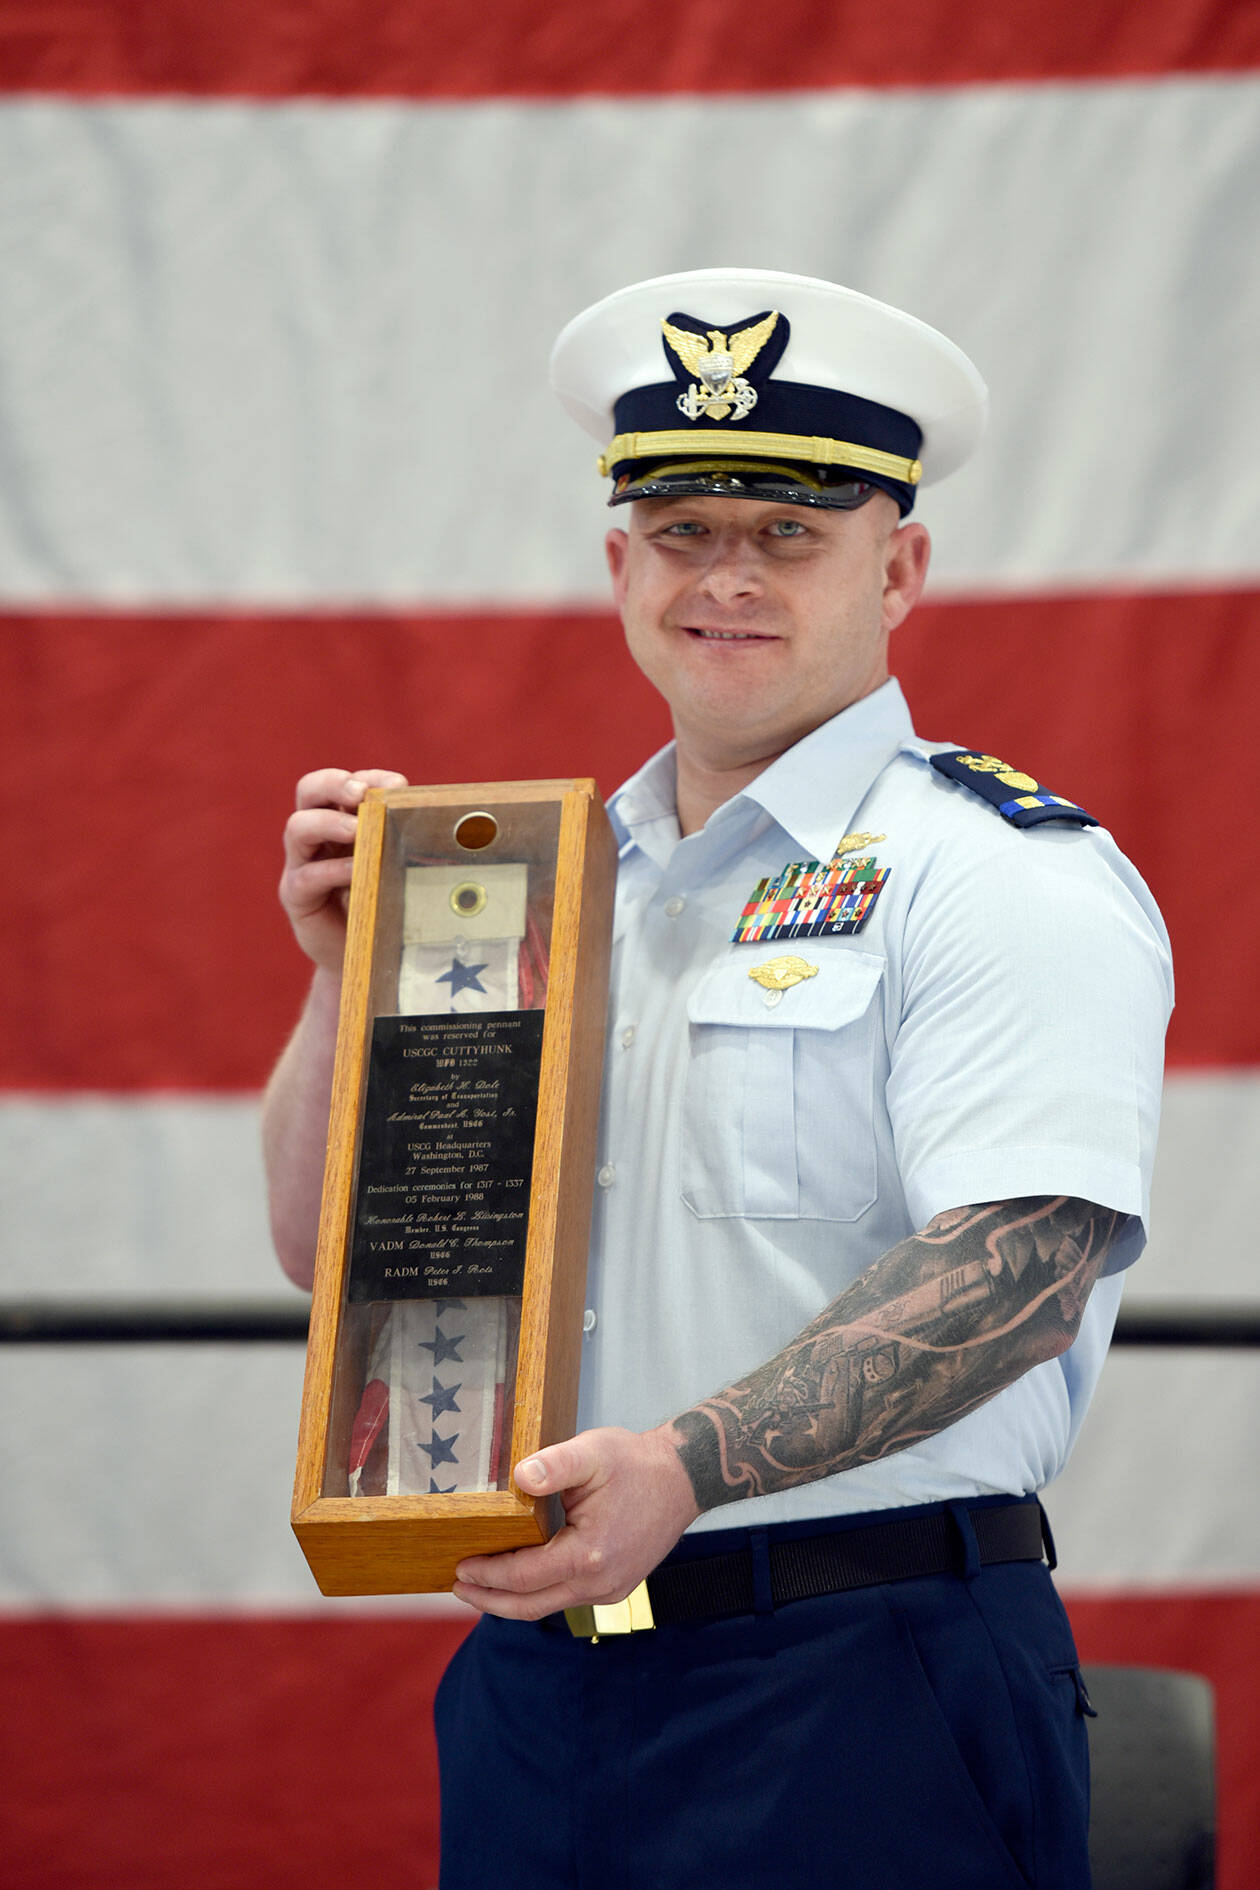 Chief Warrant Officer Daniel Garver received the Coast Guard Cutter Cuttyhunk’s commissioning pennant during a ceremony held Thursday, May 5, 2022, at Air Station Port Angeles. The ceremony was held to decommission the Cuttyhunk, and Garver, the vessel’s commanding officer, received the pennant in accordance with tradition. (U.S. Coast Guard photo by Petty Officer 3rd Class Michael Clark)